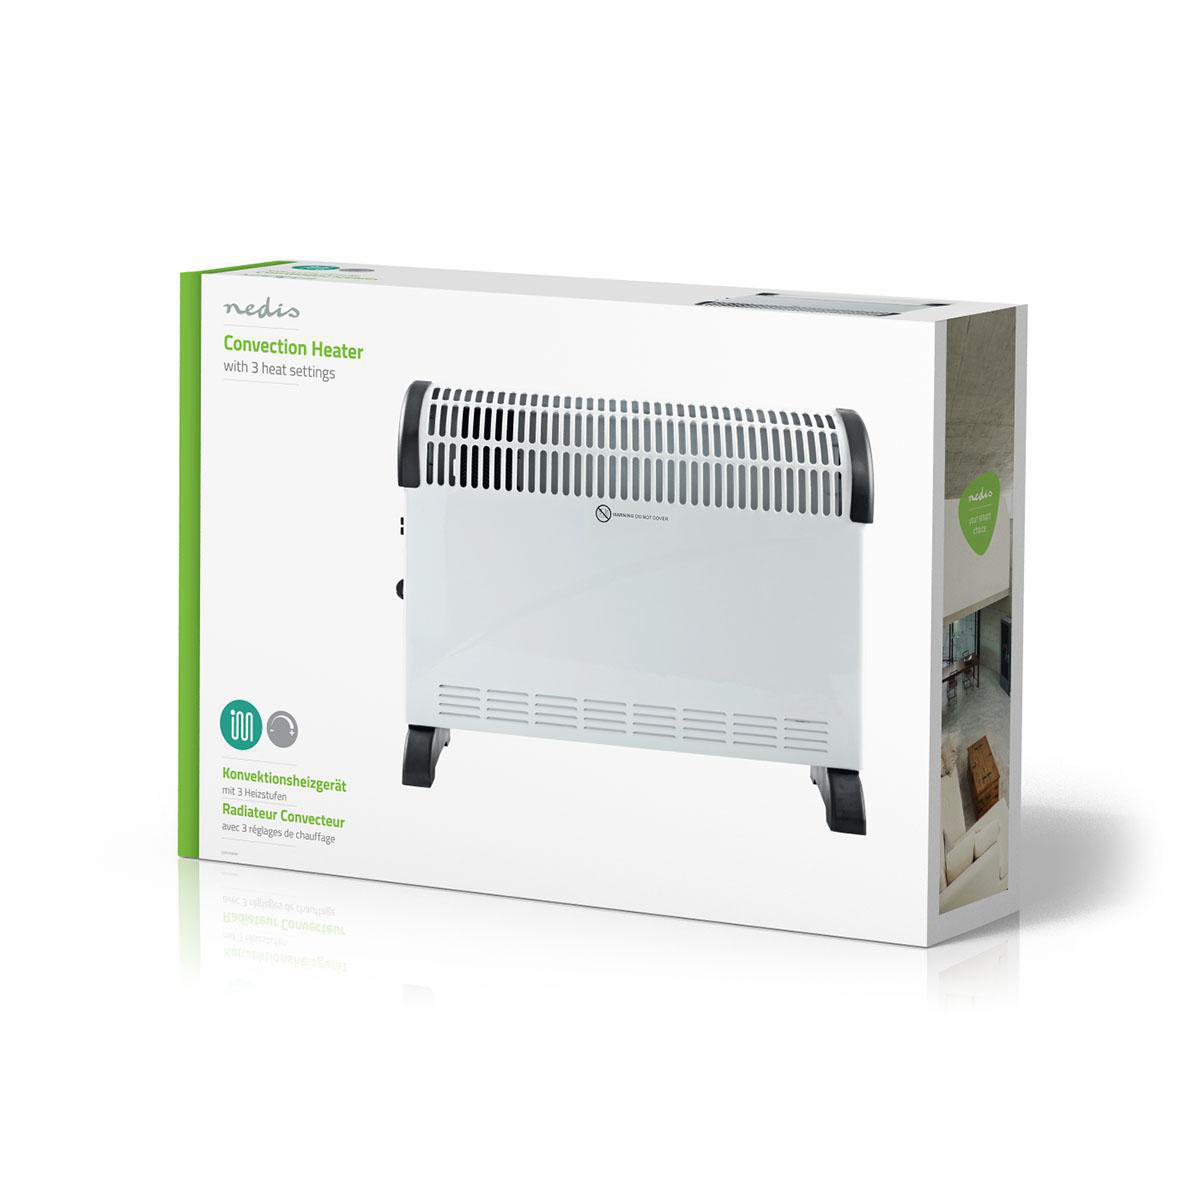 NEW 2000W PORTABLE CONVECTOR HEATER RADIATOR ADJUSTABLE WITH 3 HEAT SETTINGS 